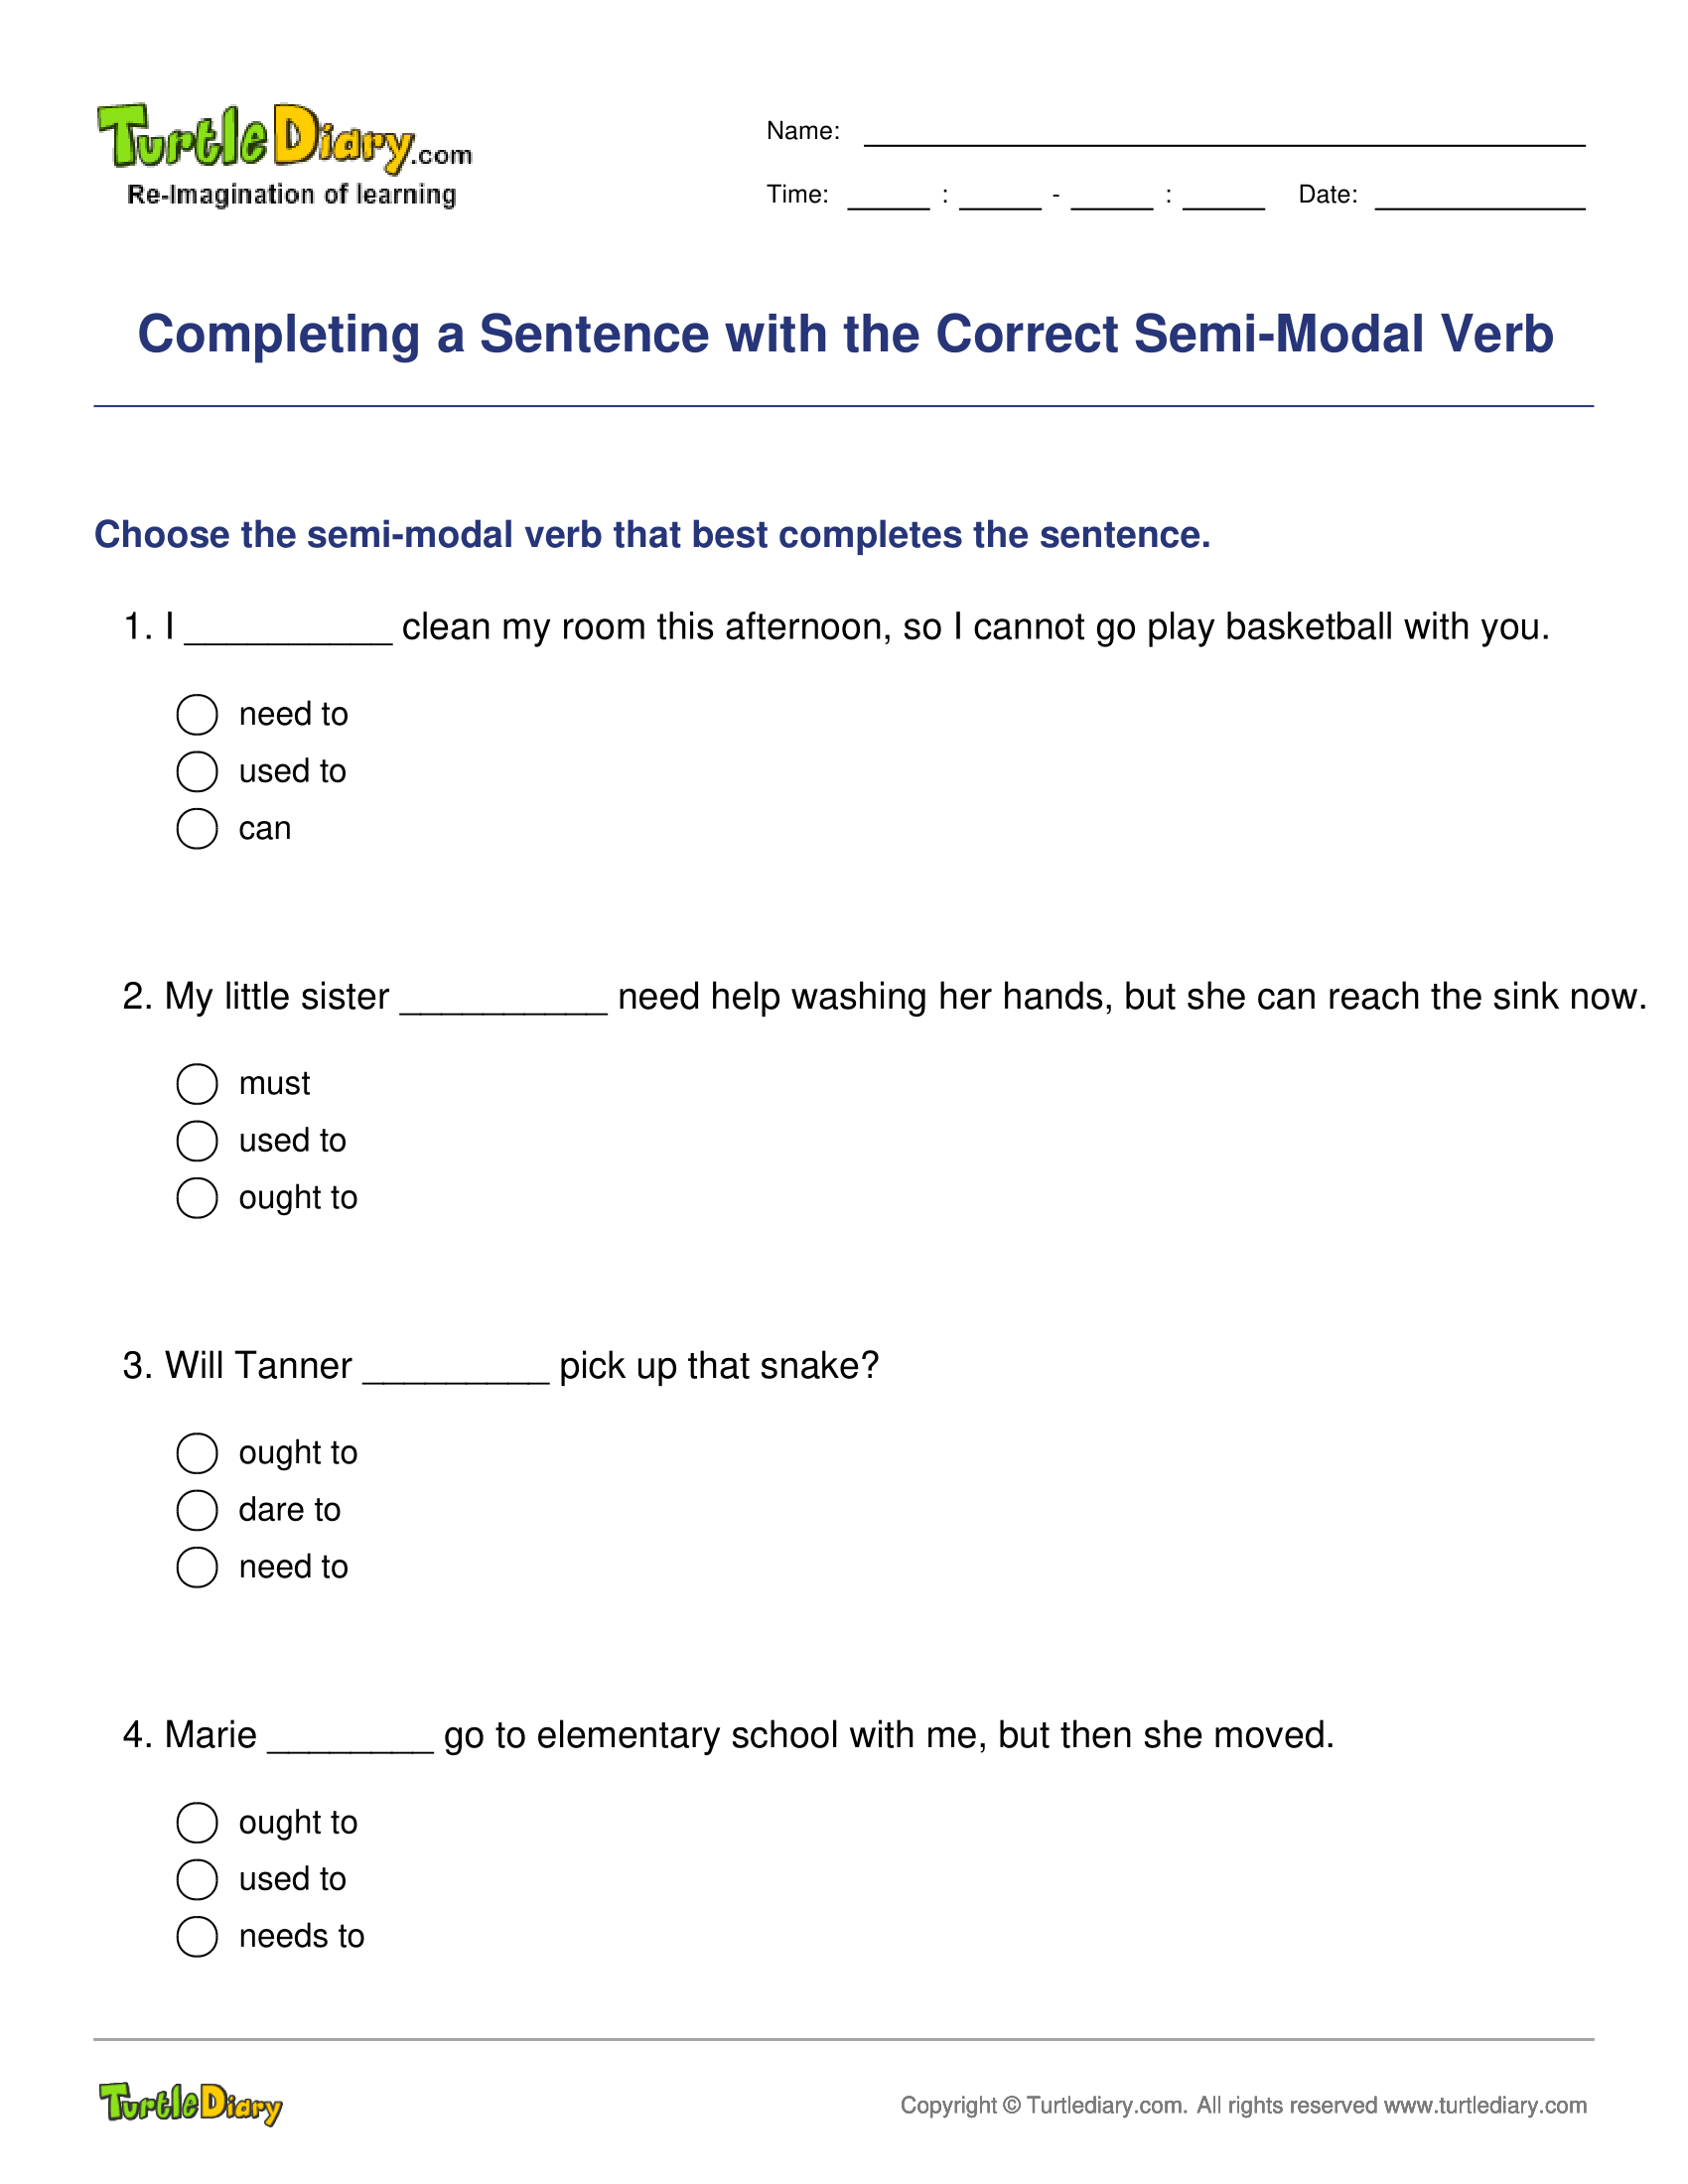 Completing a Sentence with the Correct Semi-Modal Verb